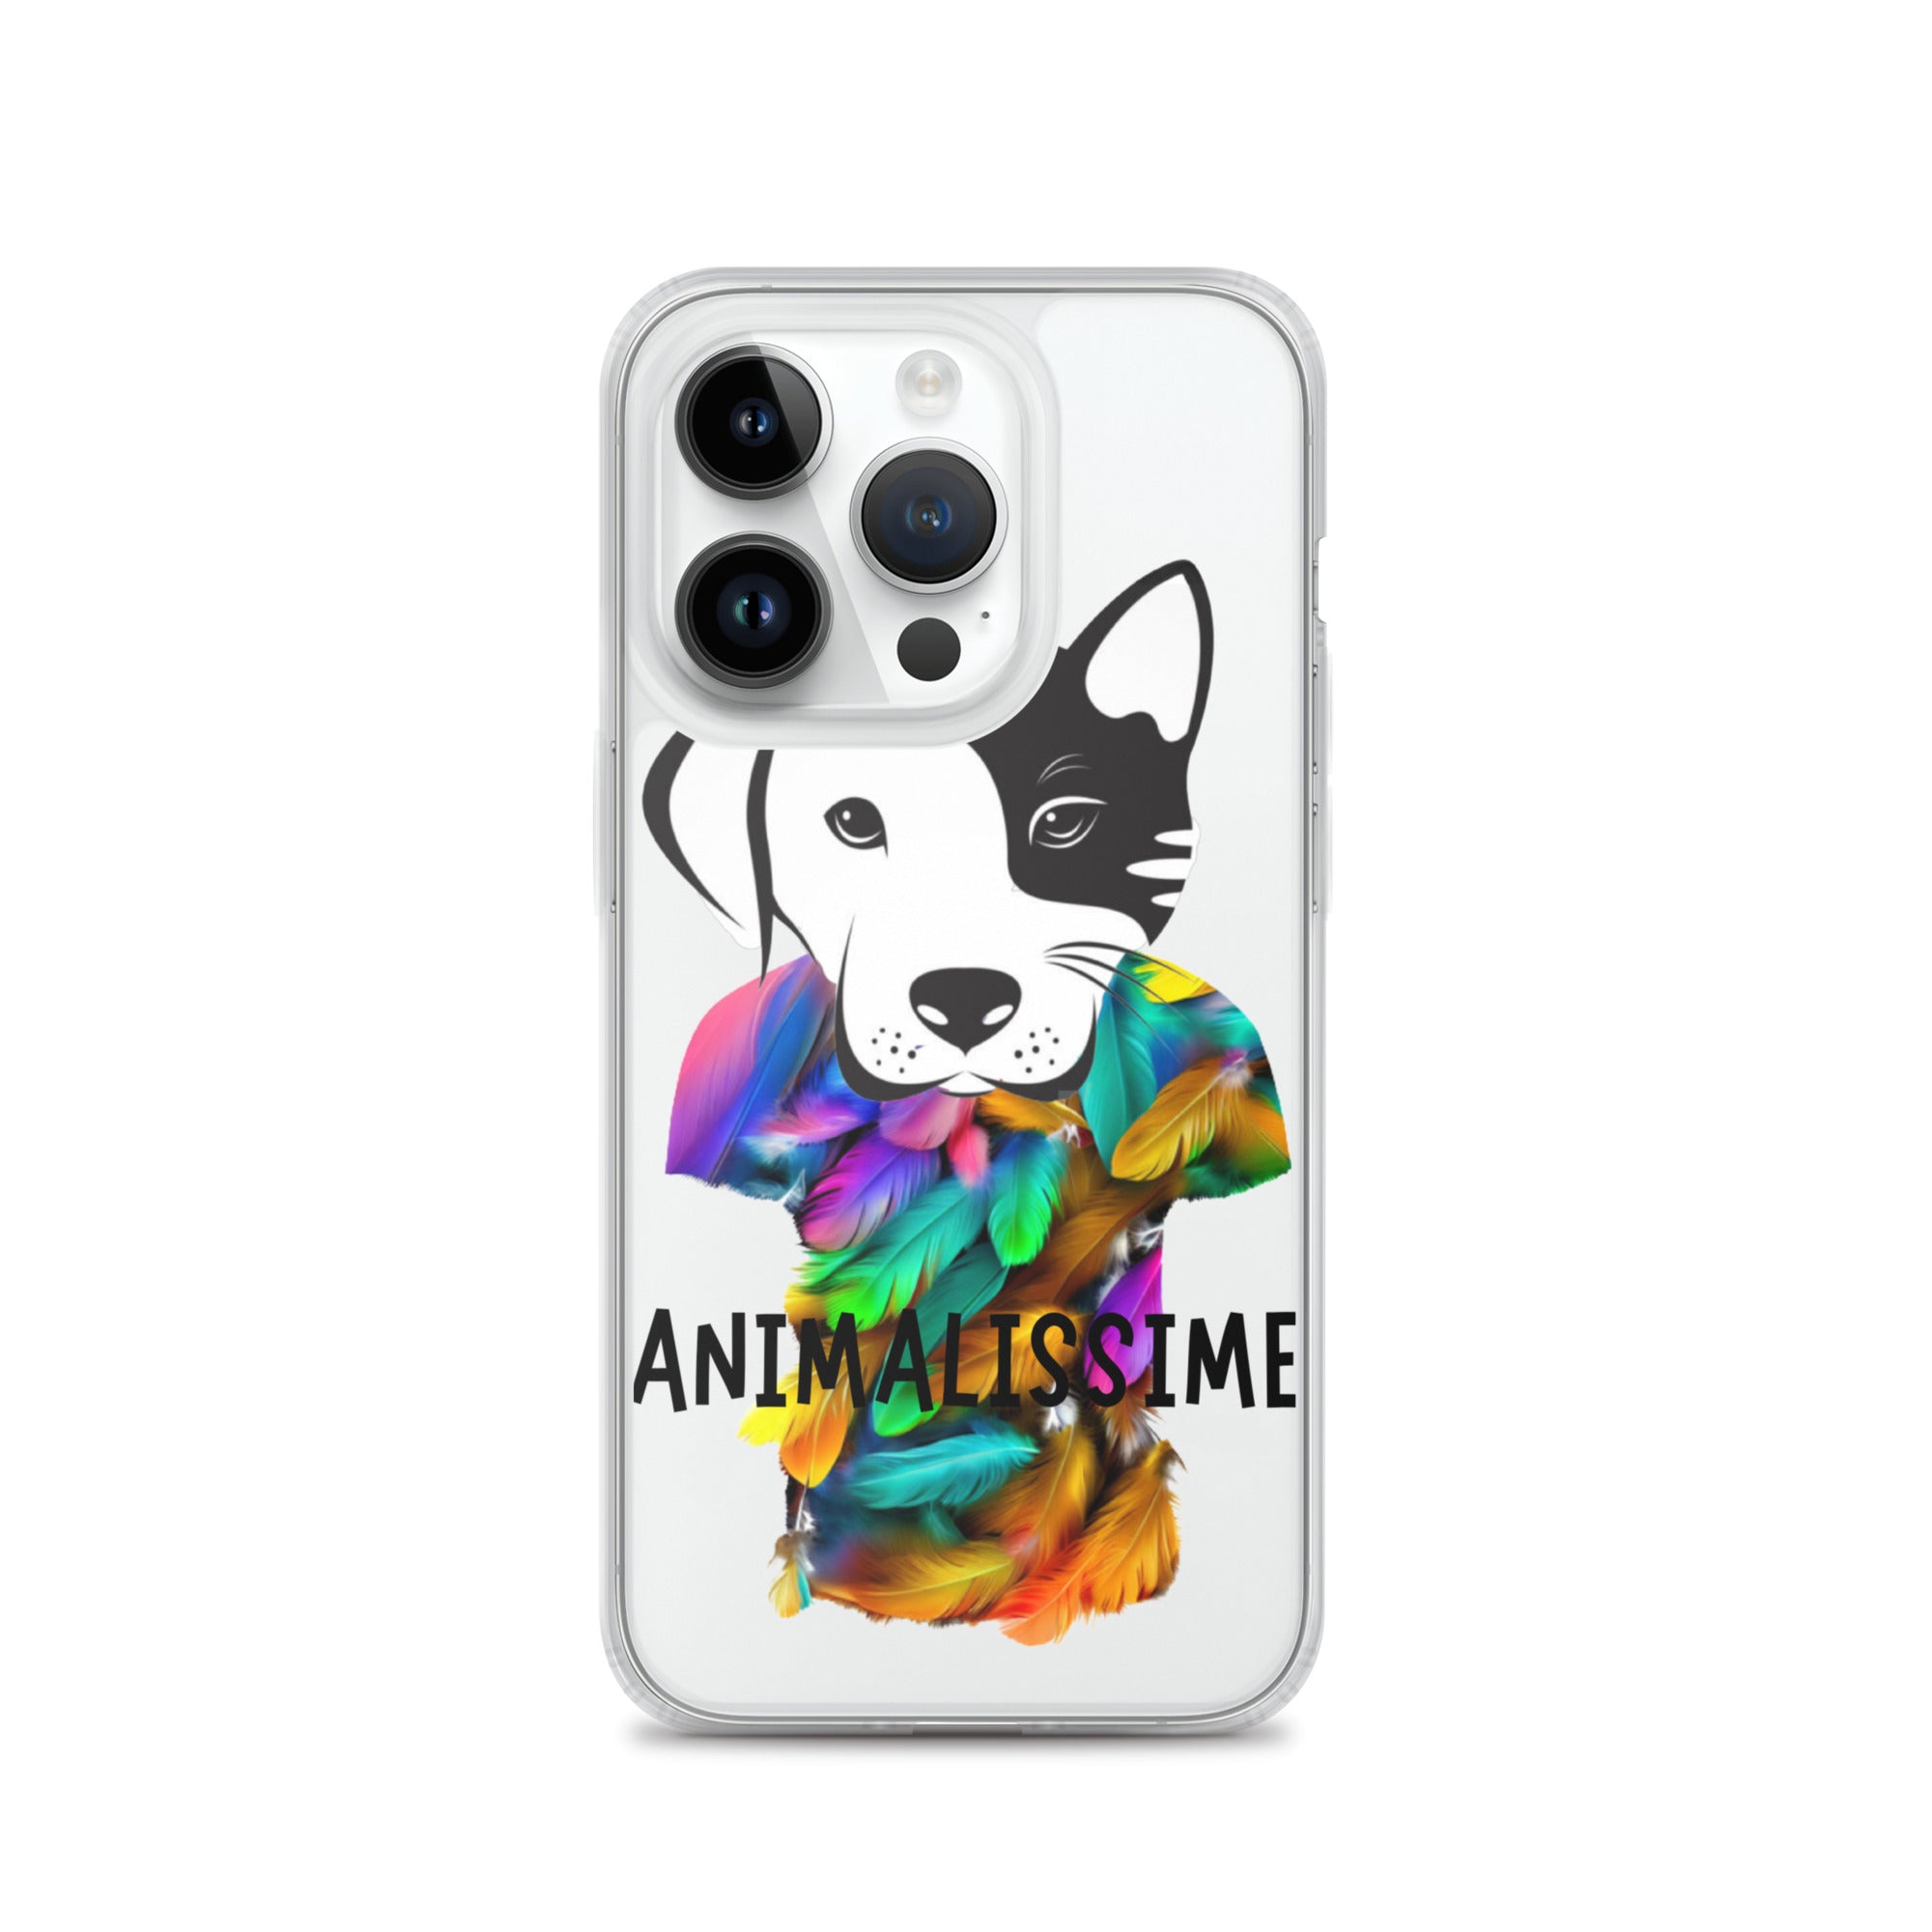 Animalissime - Coque pour iPhone®